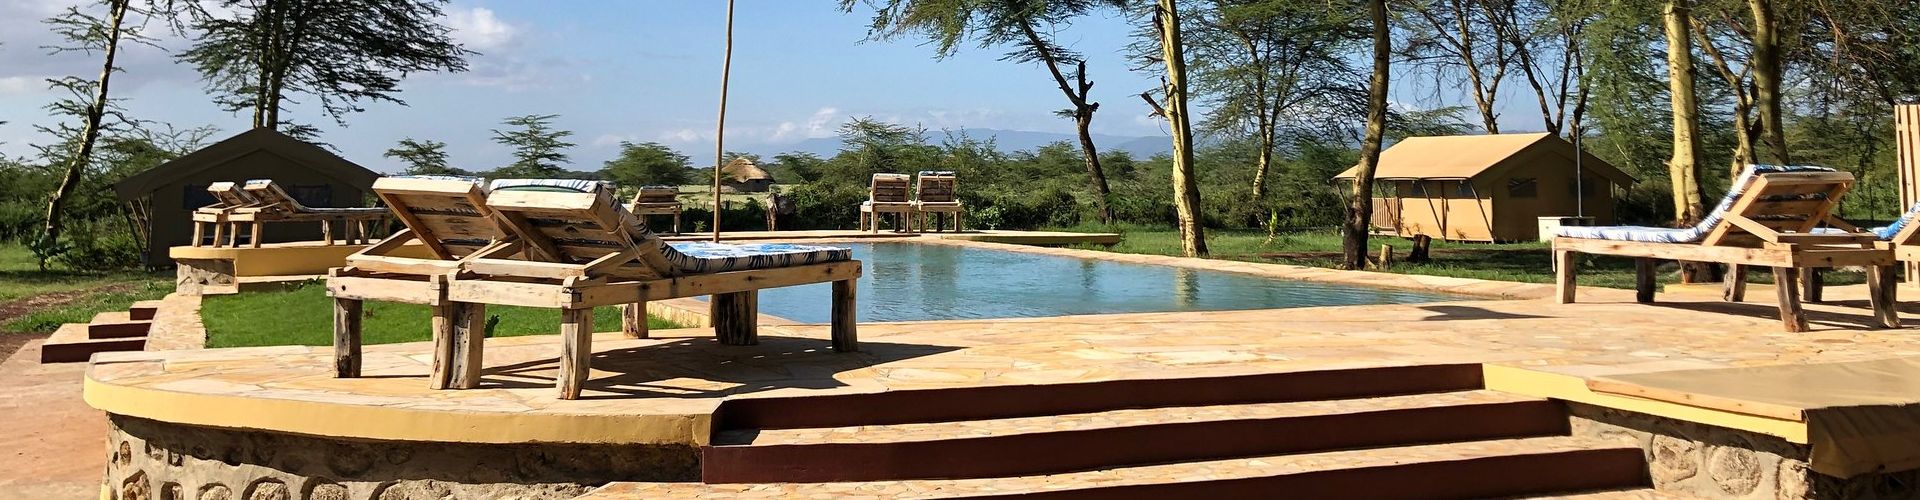 Jump into a nice swimming pool after a long trip in this Africa Safari accommodation